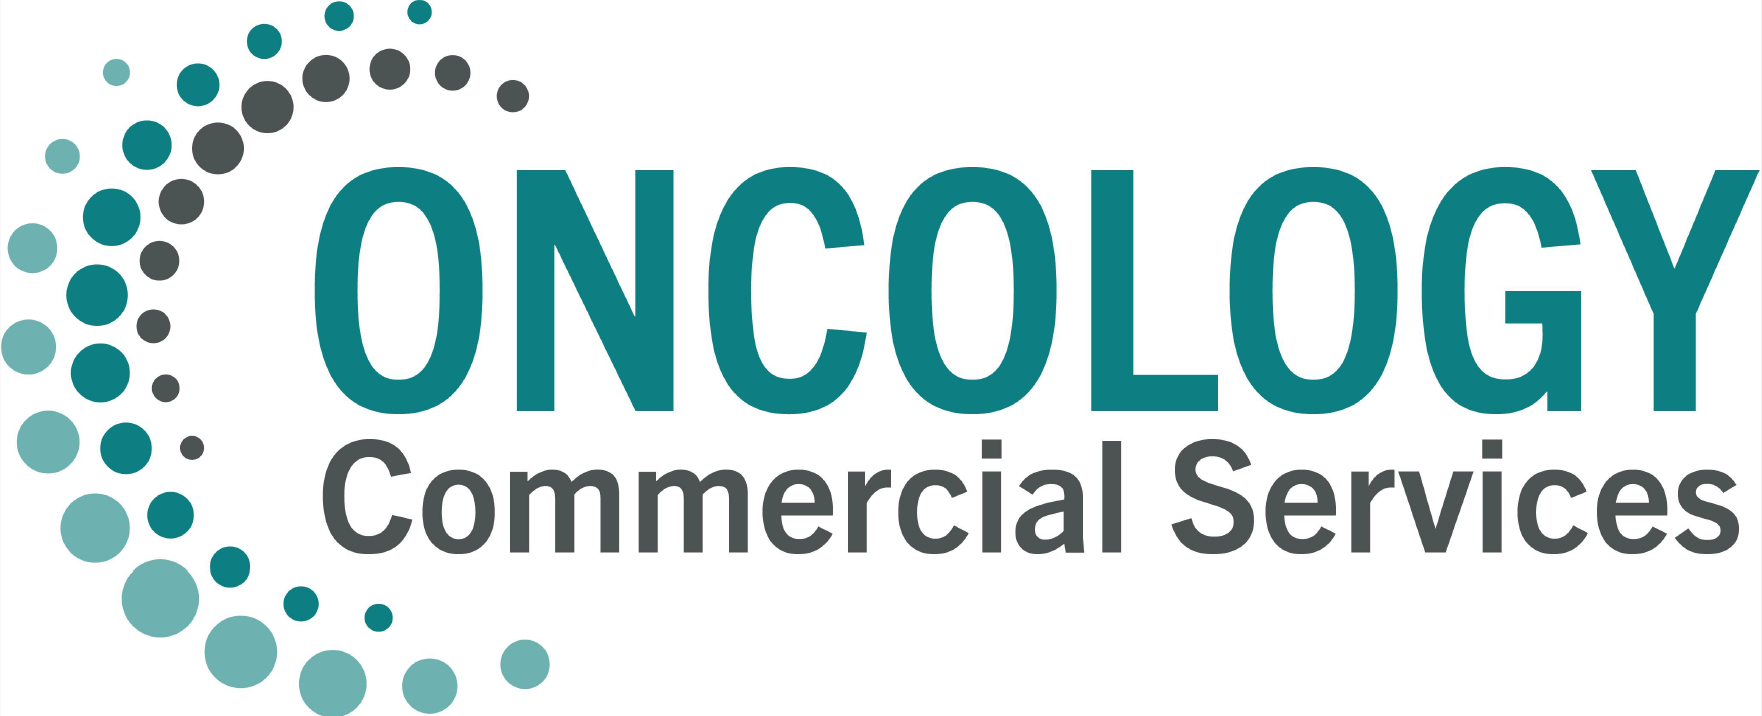 Oncology Commercial Services